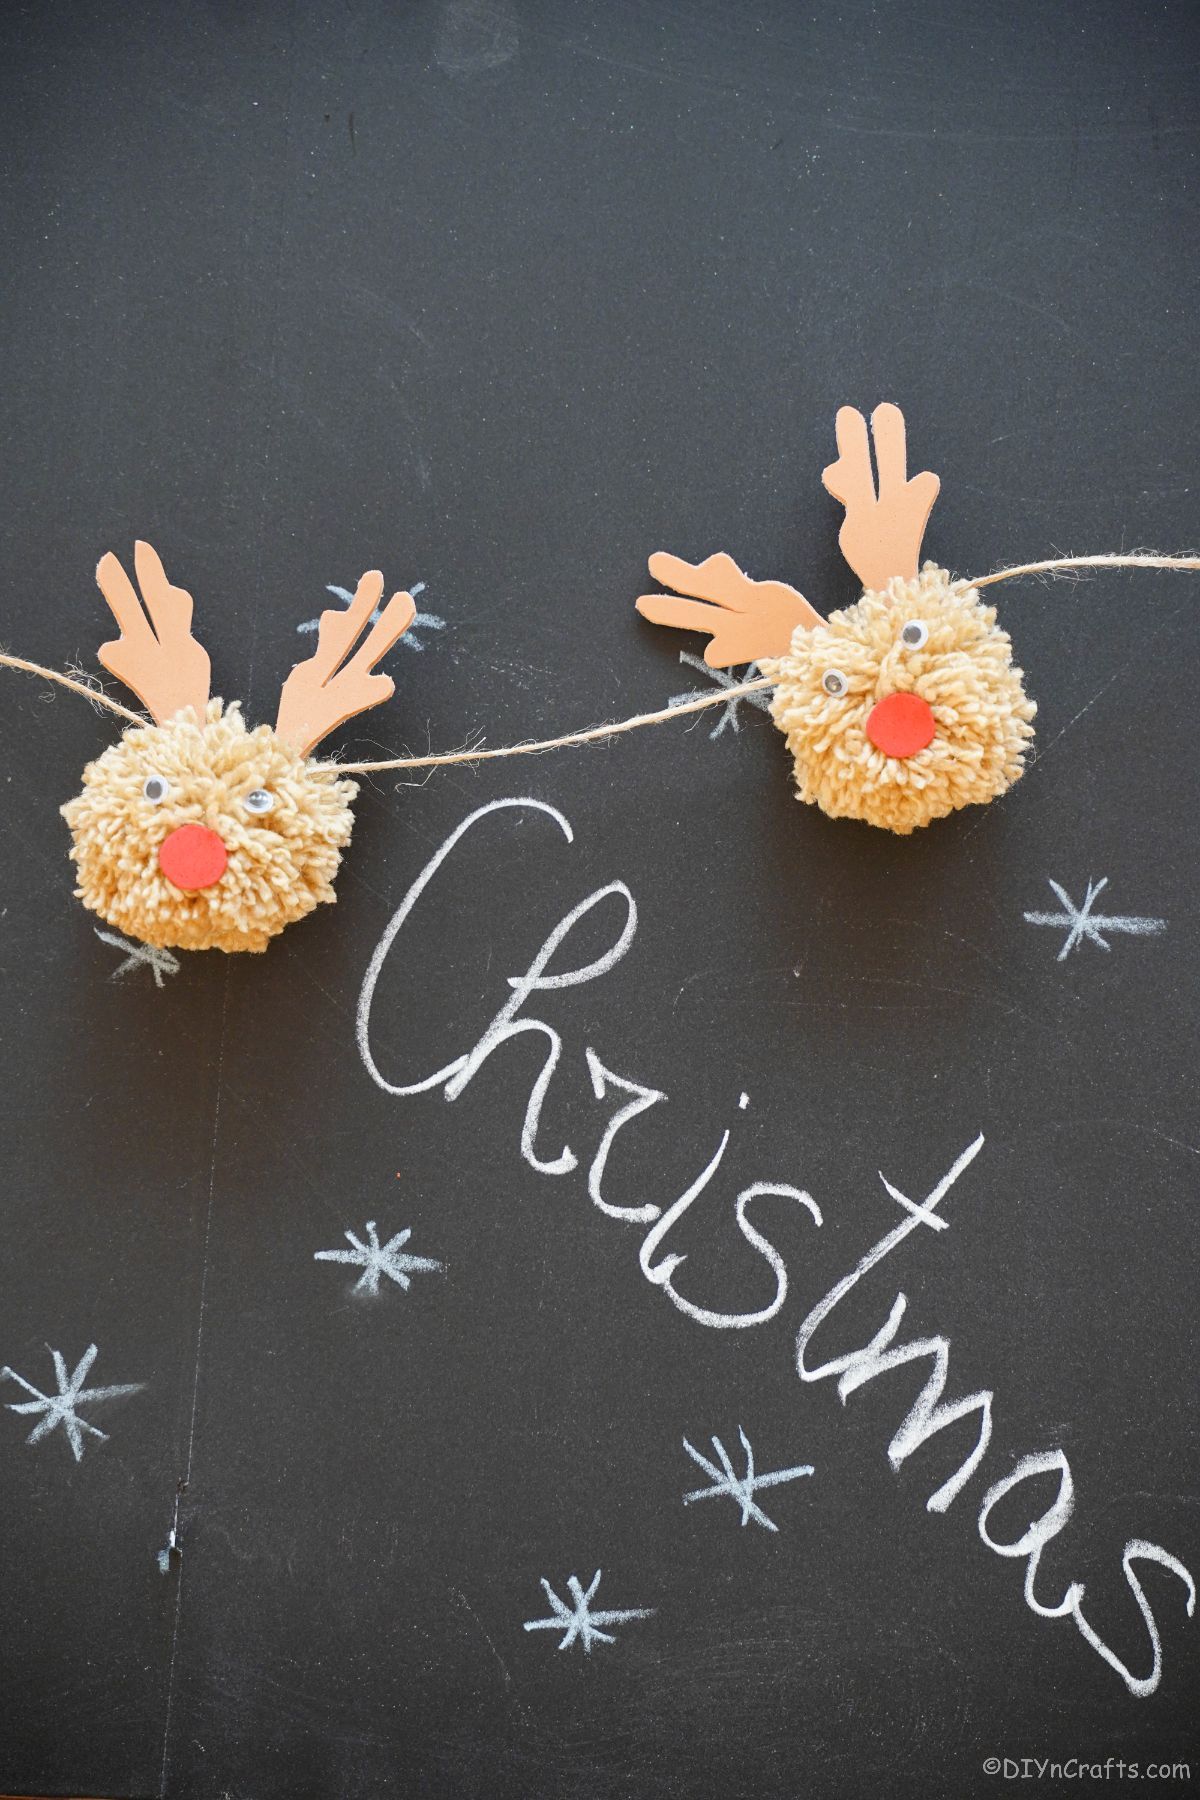 two pom pom reindeer against chalkboard with the word christmas